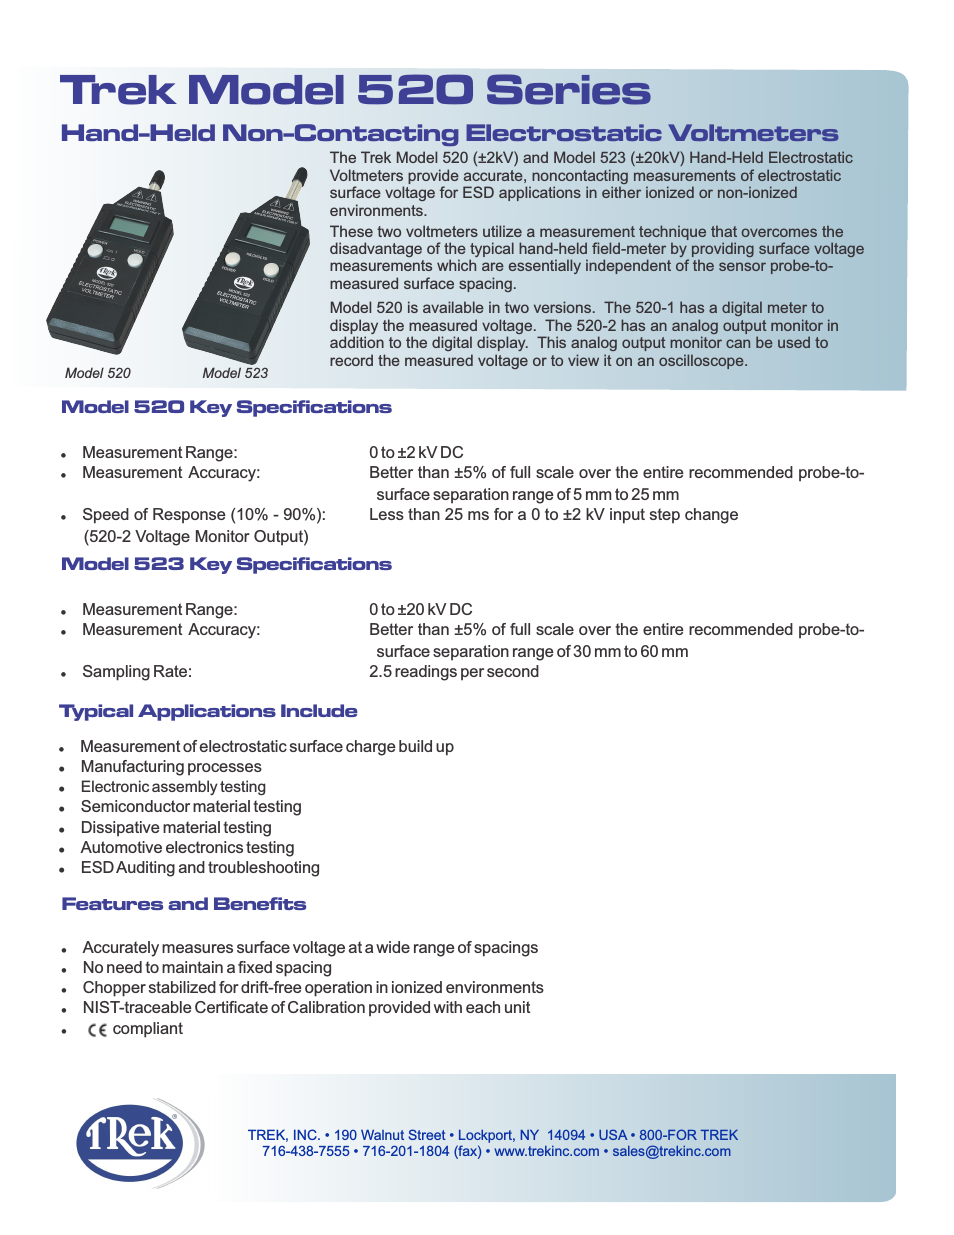 520 Series Hand-Held Non-Contacting Electrostatic Voltmeters